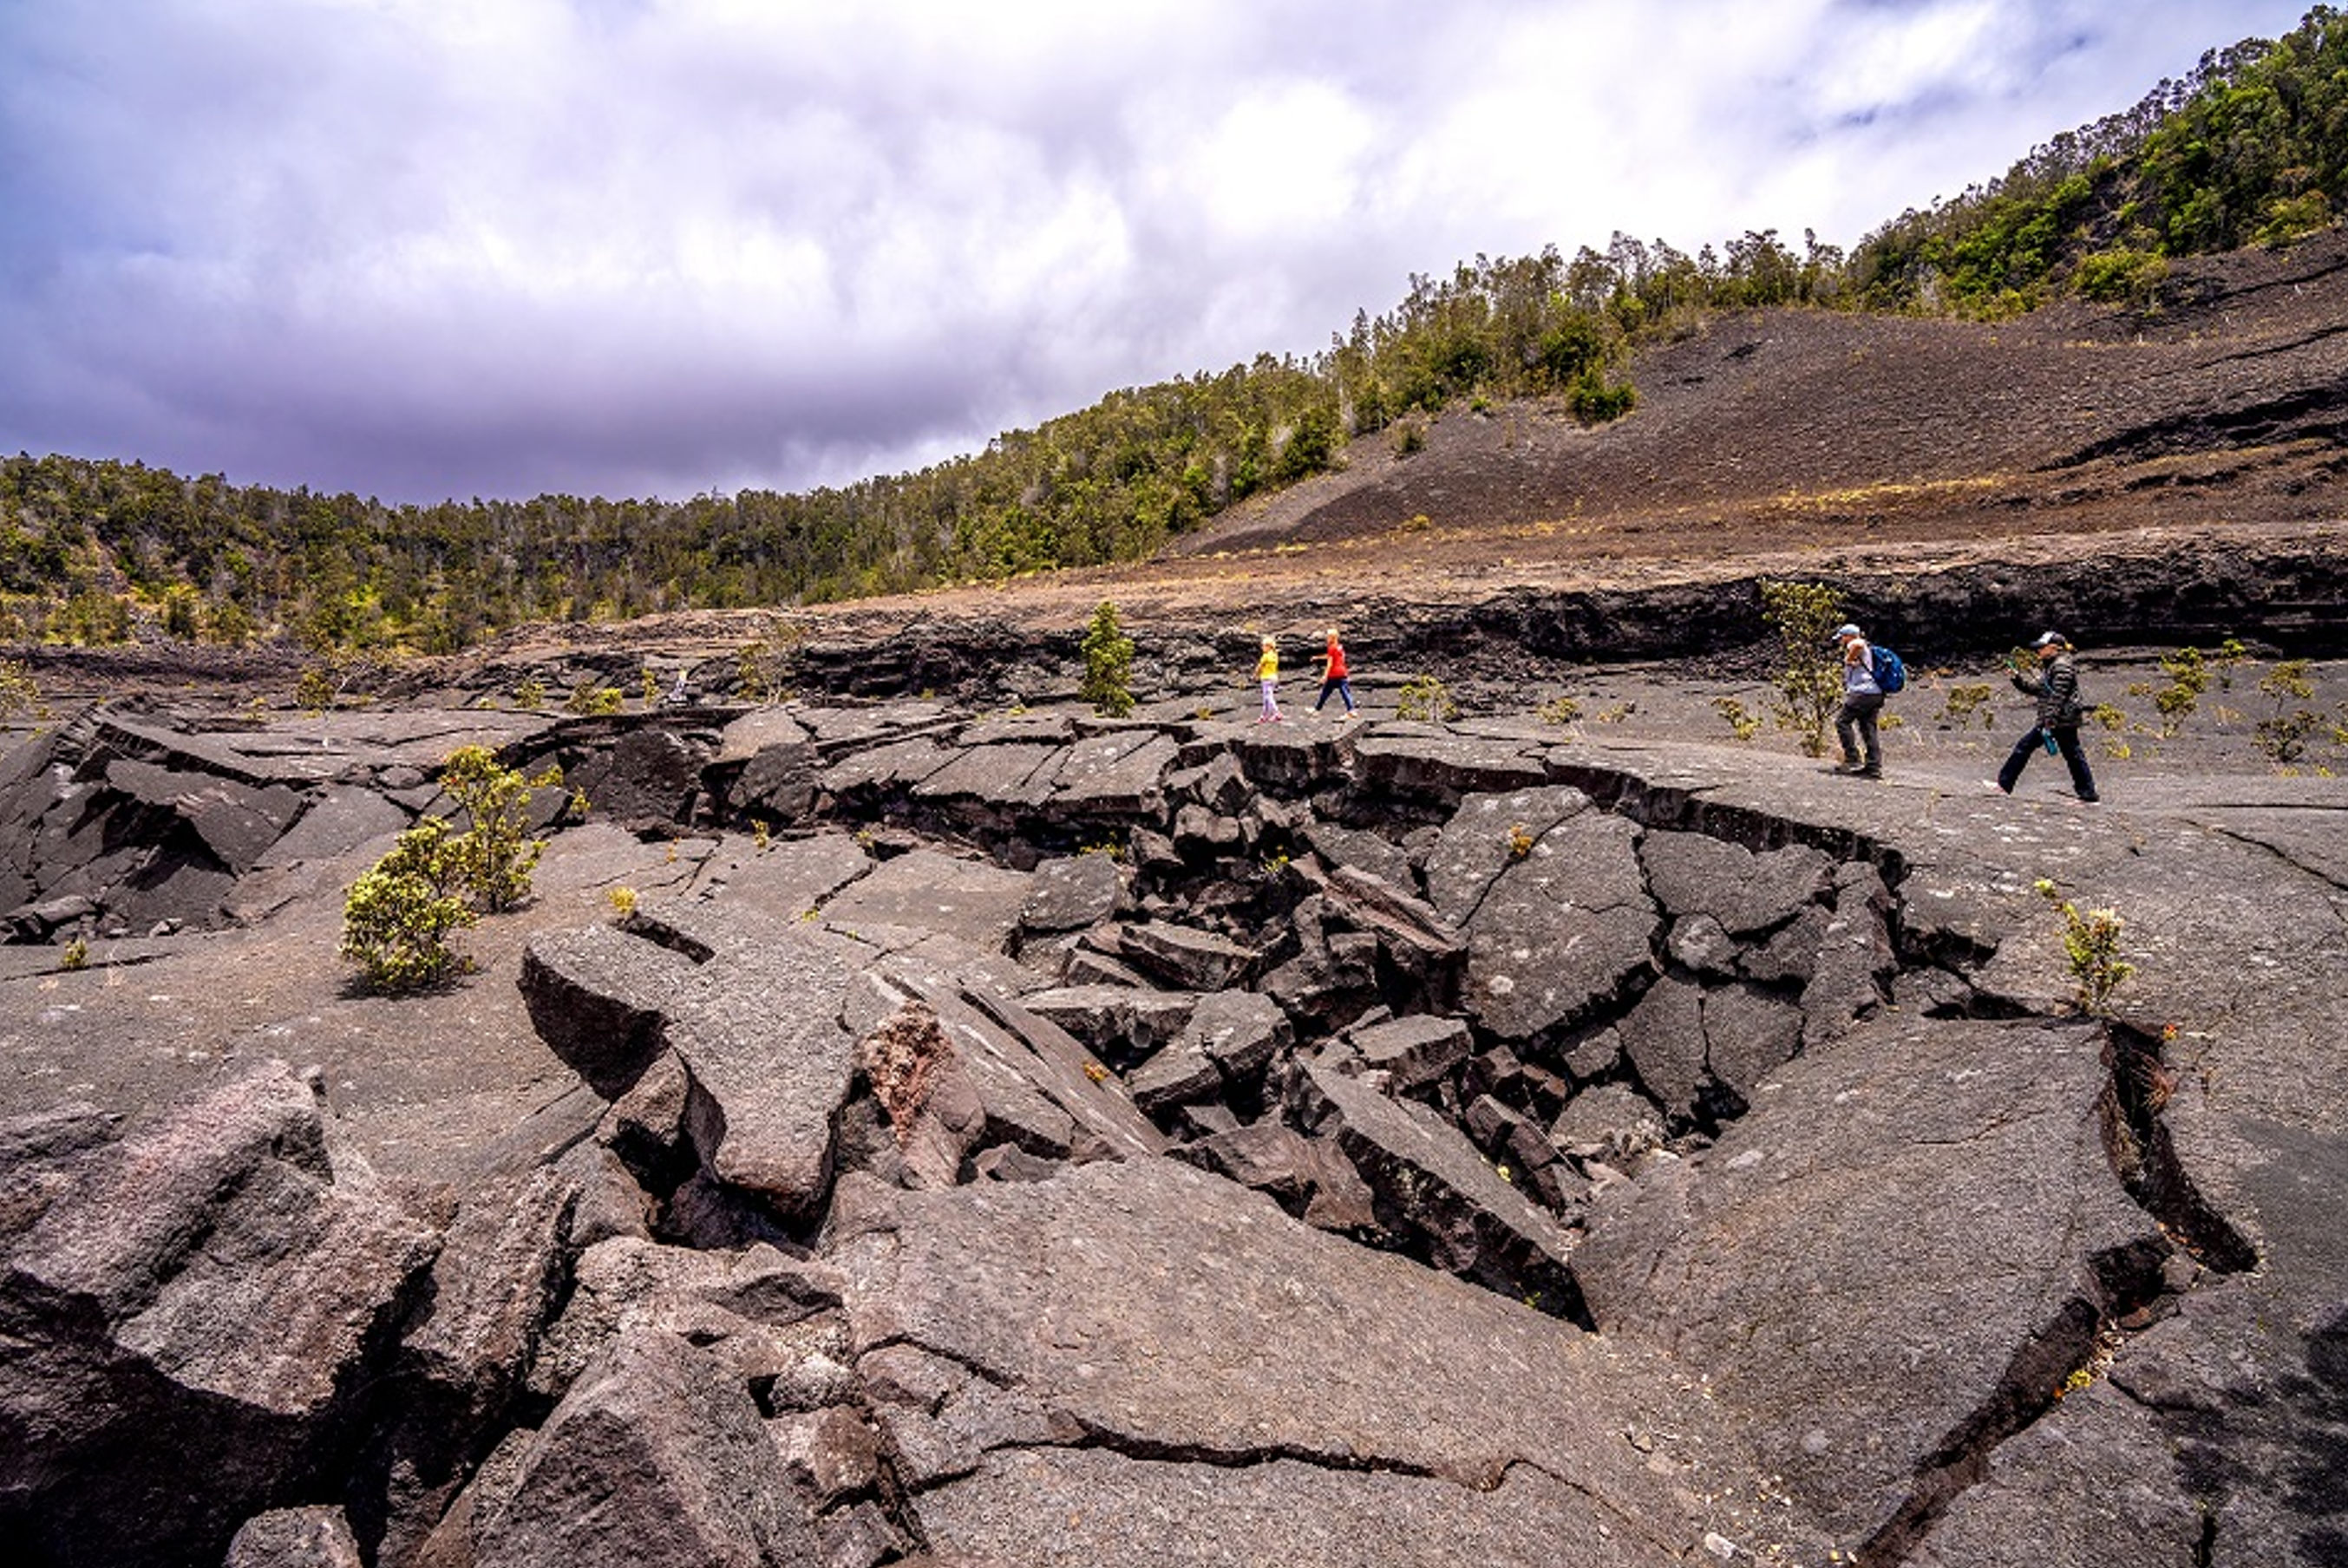 Group of people walking in a volcanic crater.